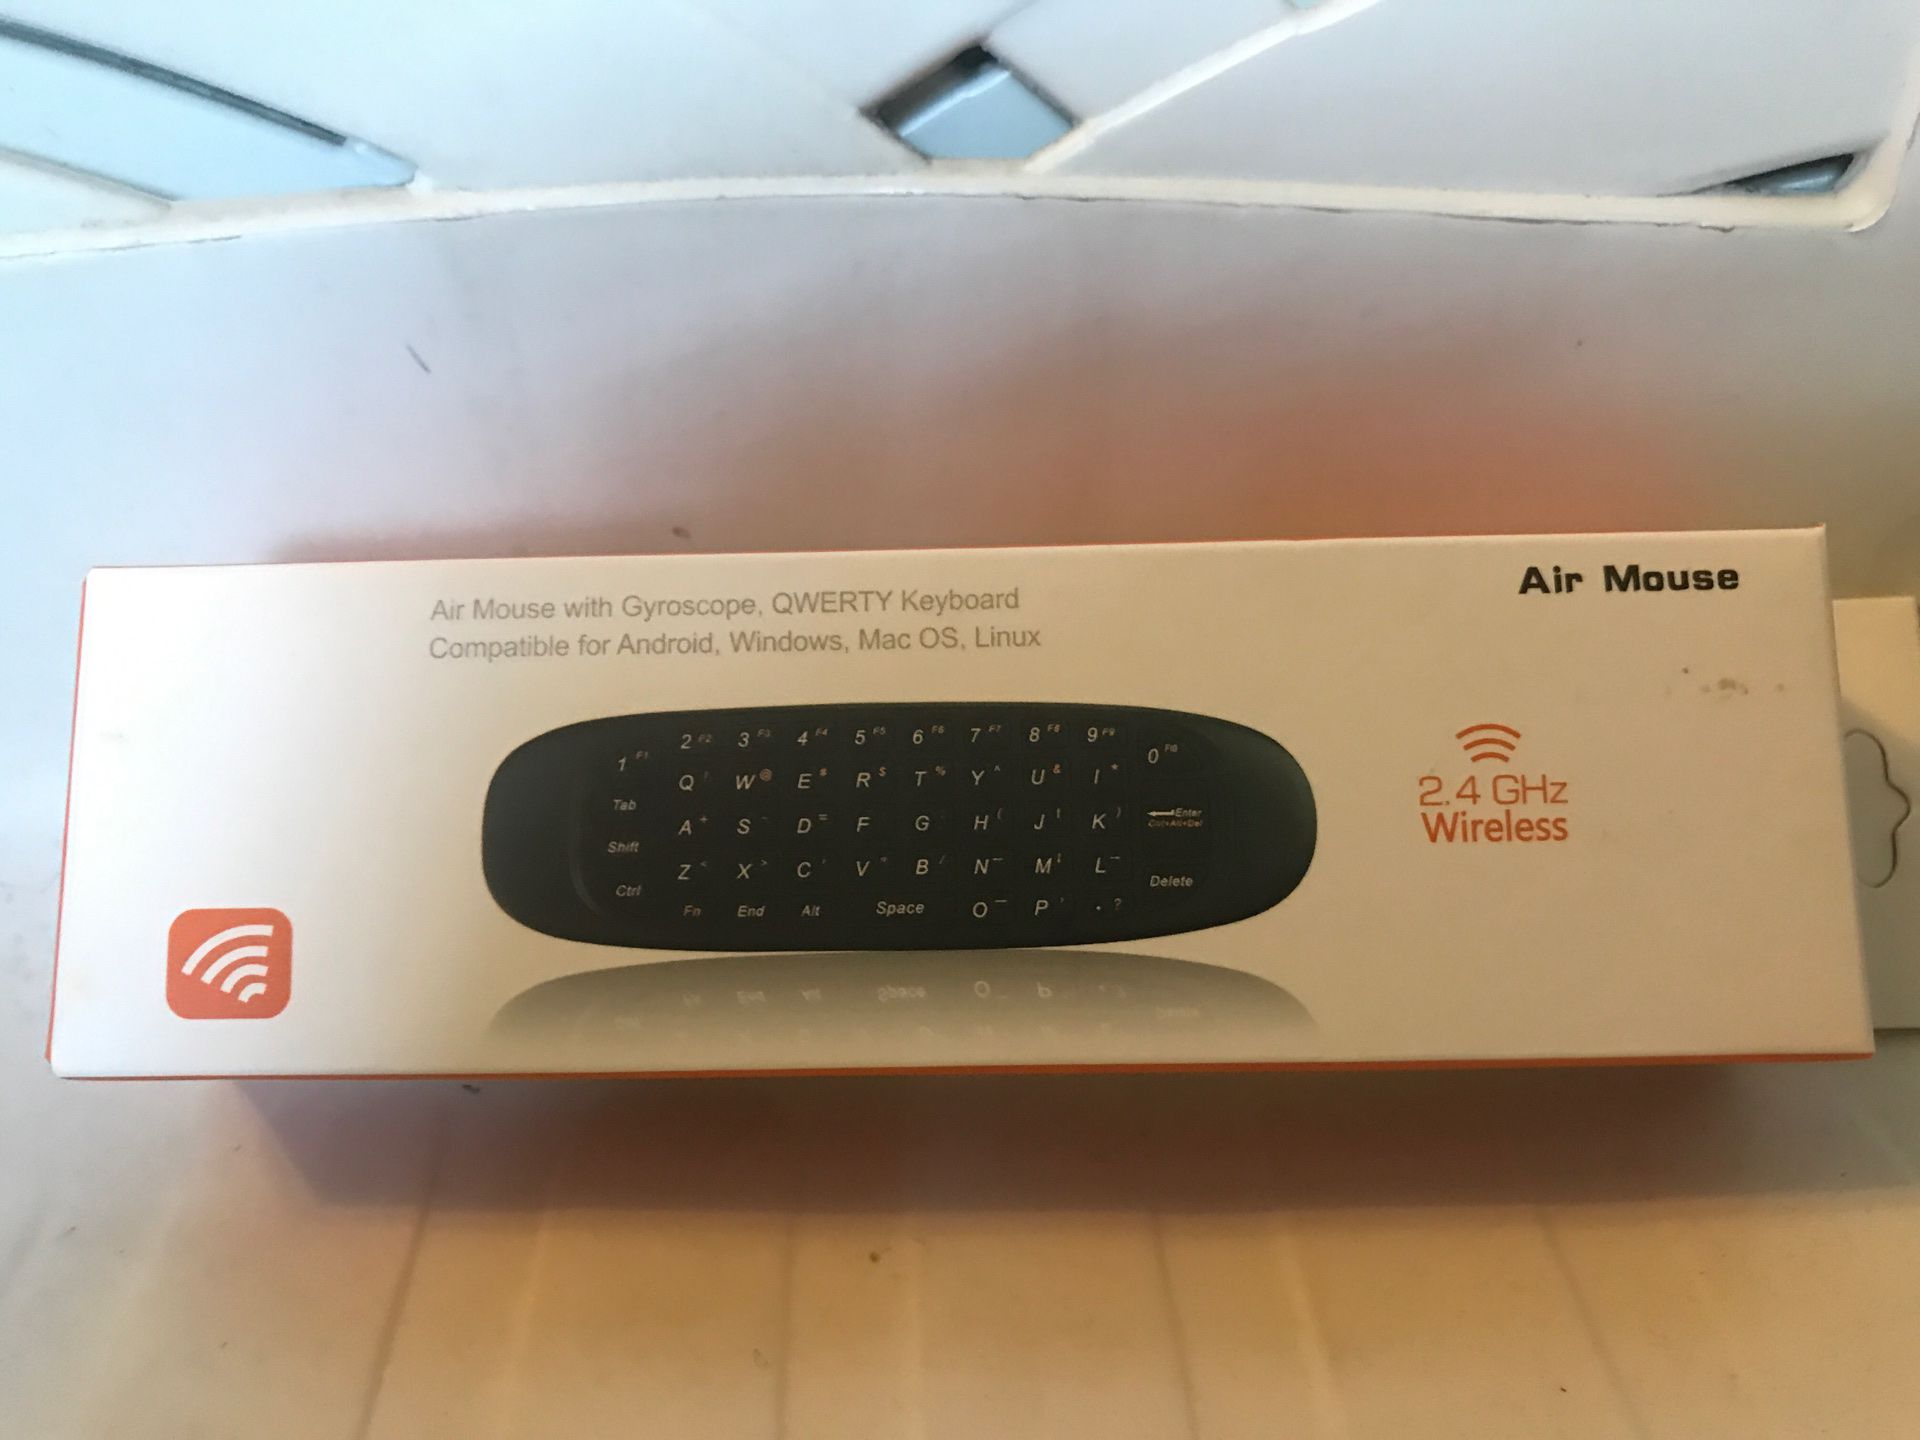 2.4 GHz air mouse rechargeable wireless keyboard remote control